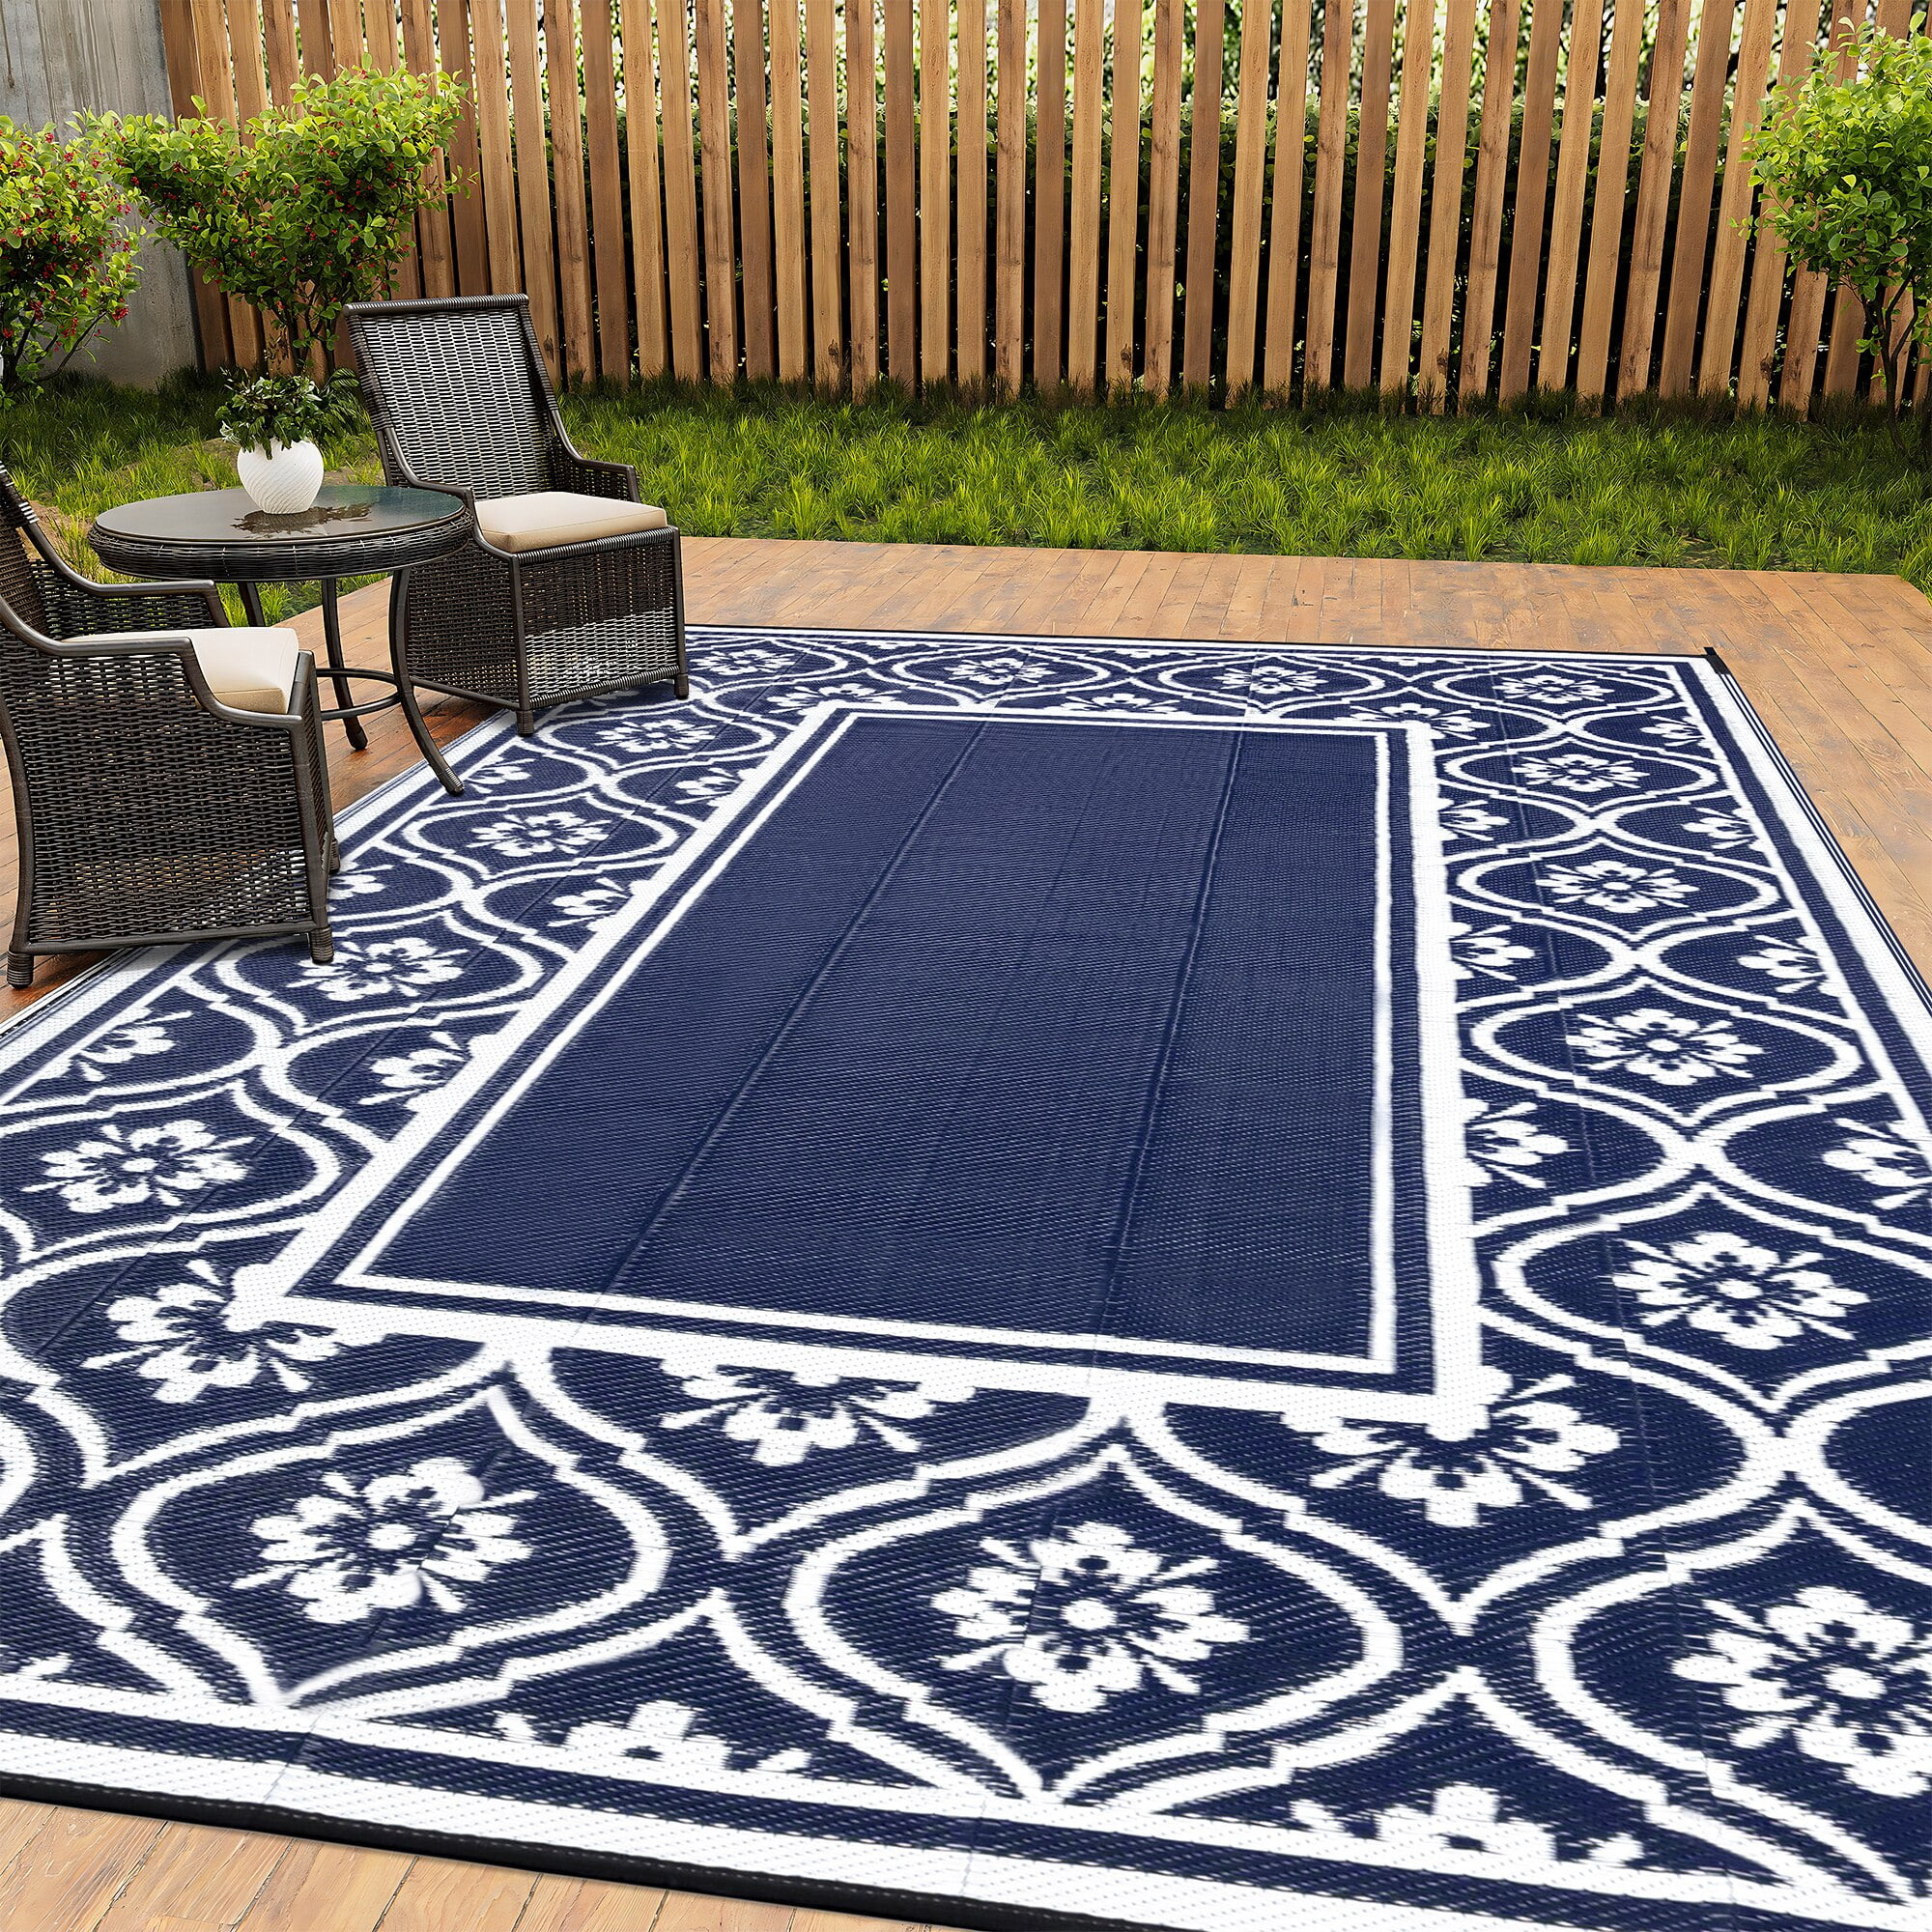 HUGEAR Outdoor Rugs on Sale Clearance 6'x9' Waterproof Patio Rugs Area Rugs  Plastic Straw Rugs, Camping RV Rugs for outside, Balcony, Pool, Deck Rug 